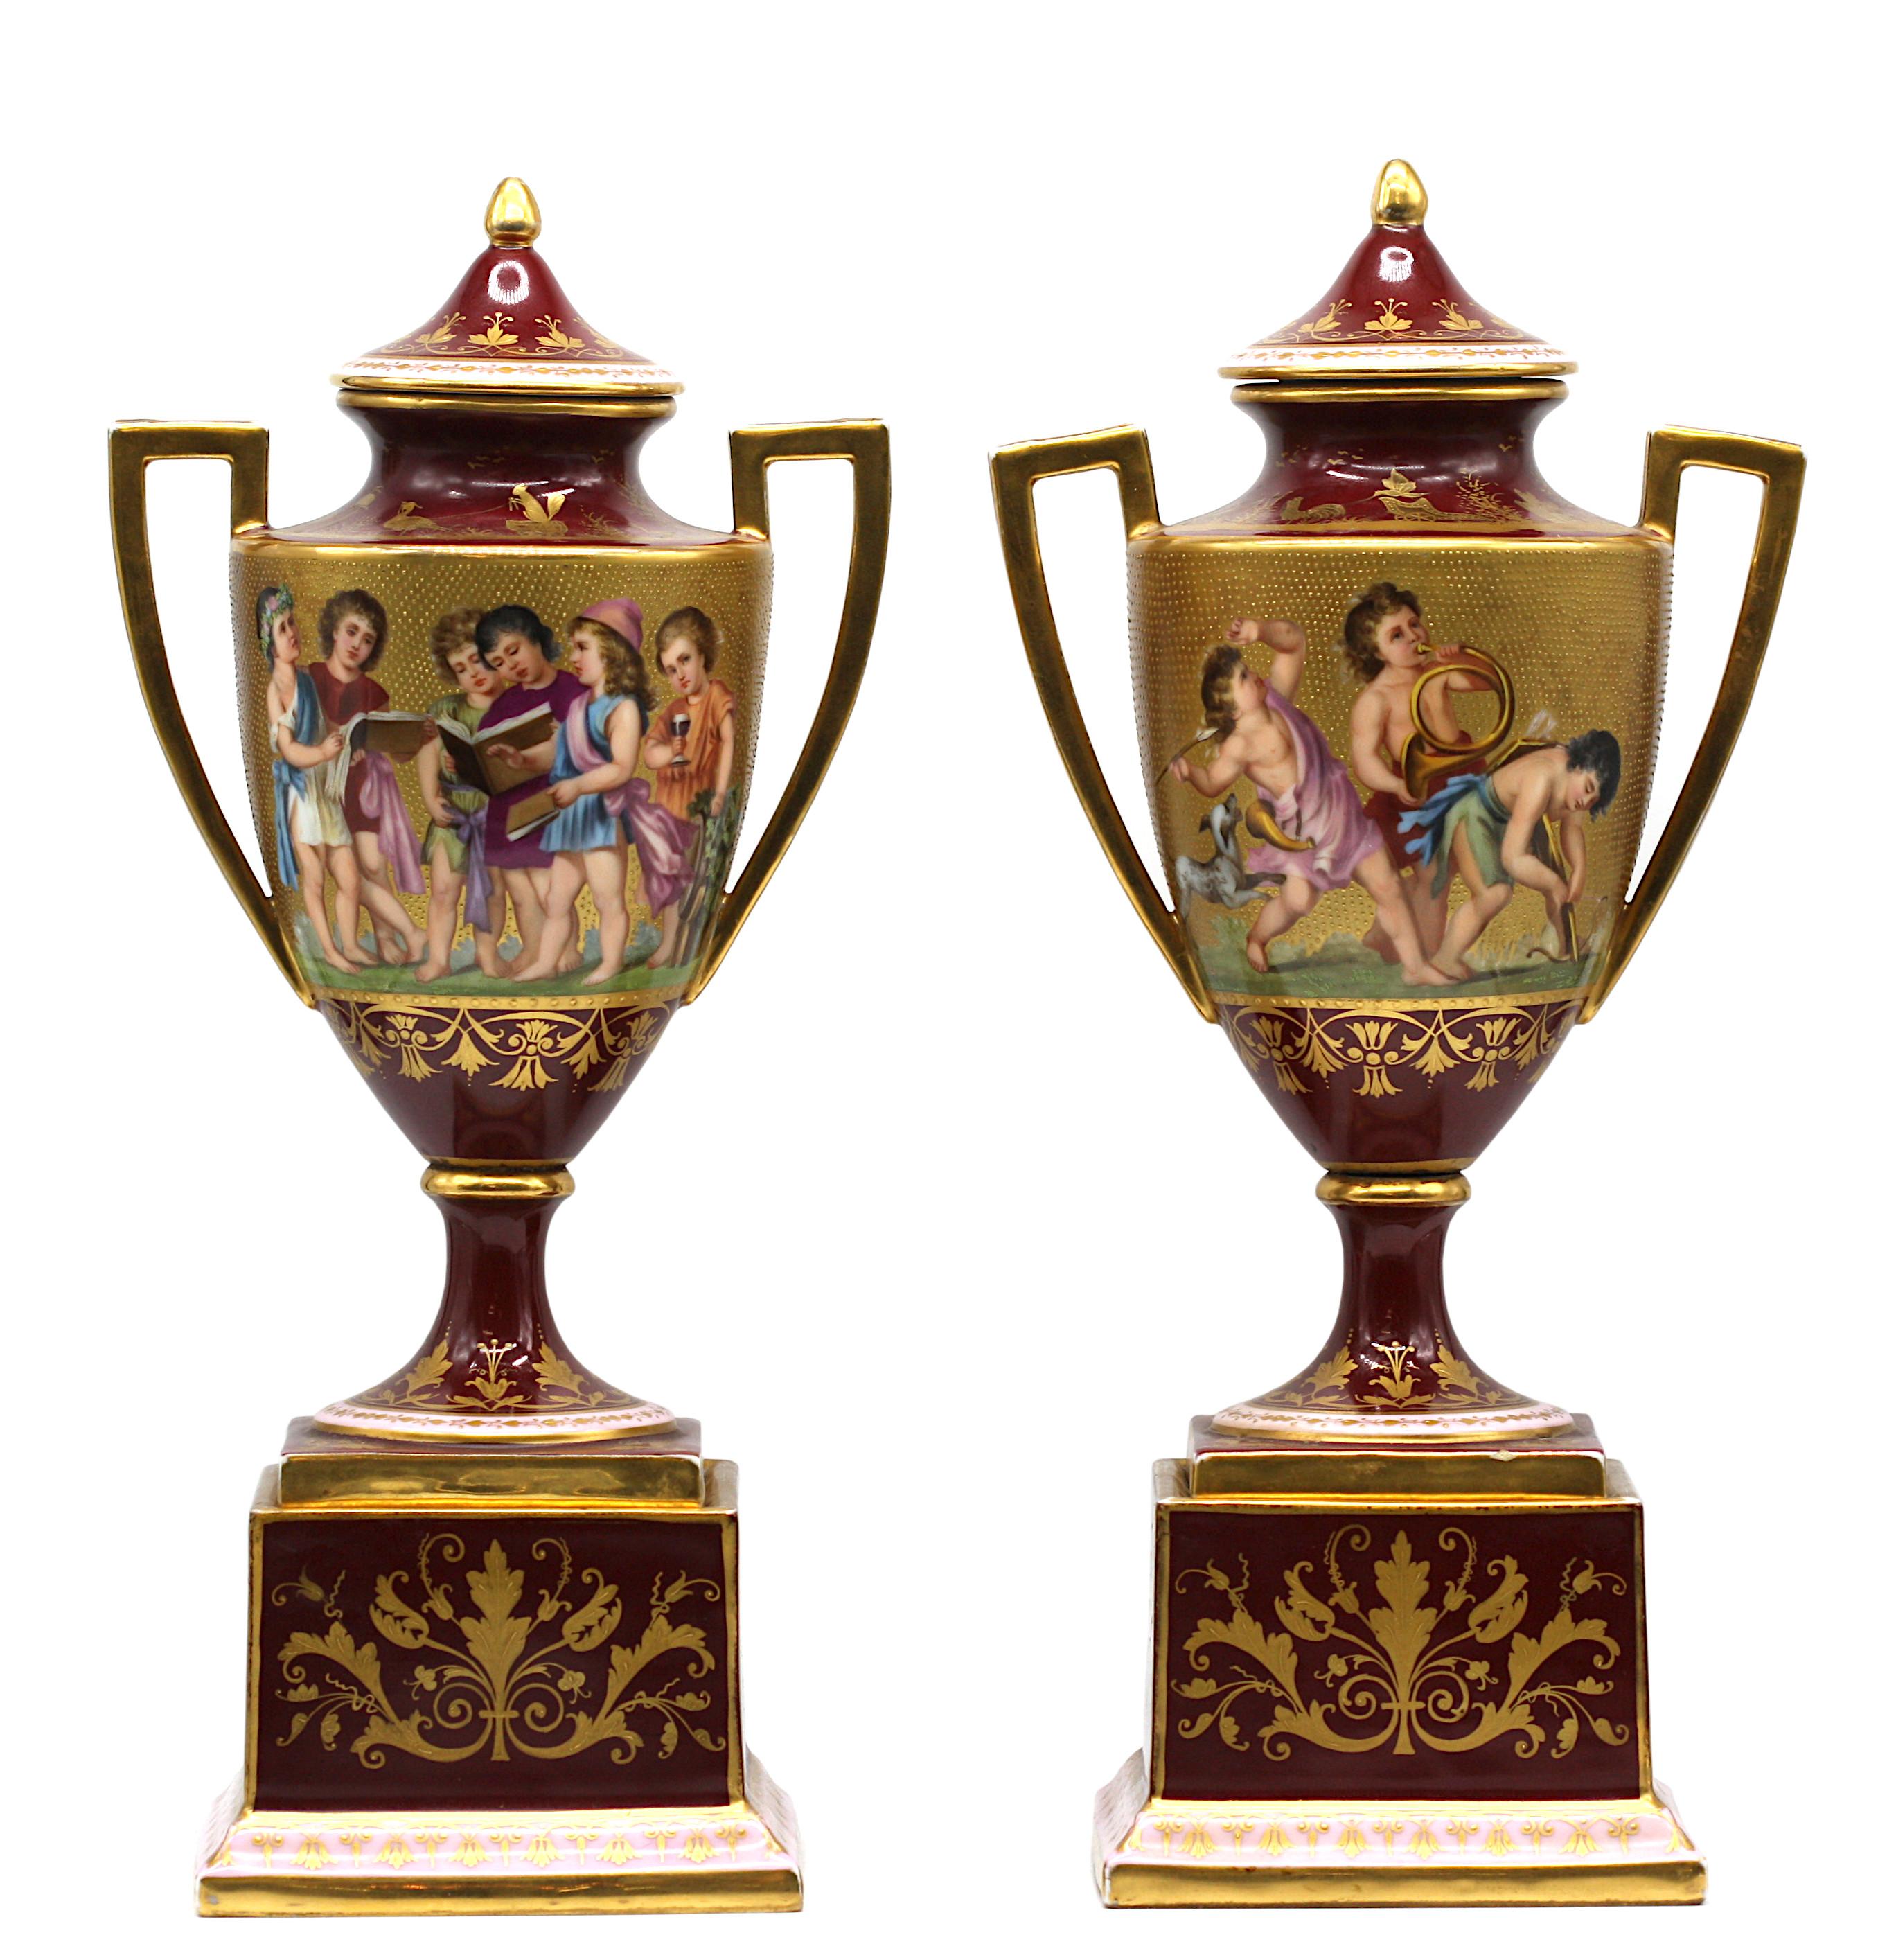 A pair of Vienna style Two-Handled Vases and Covers on Bases, circa 1890
of cylindrical form affixed with two scroll handles, painted with classical scenes, the elaborate body composed of multi-coloured enamels and gilt, reserved on a dark-red